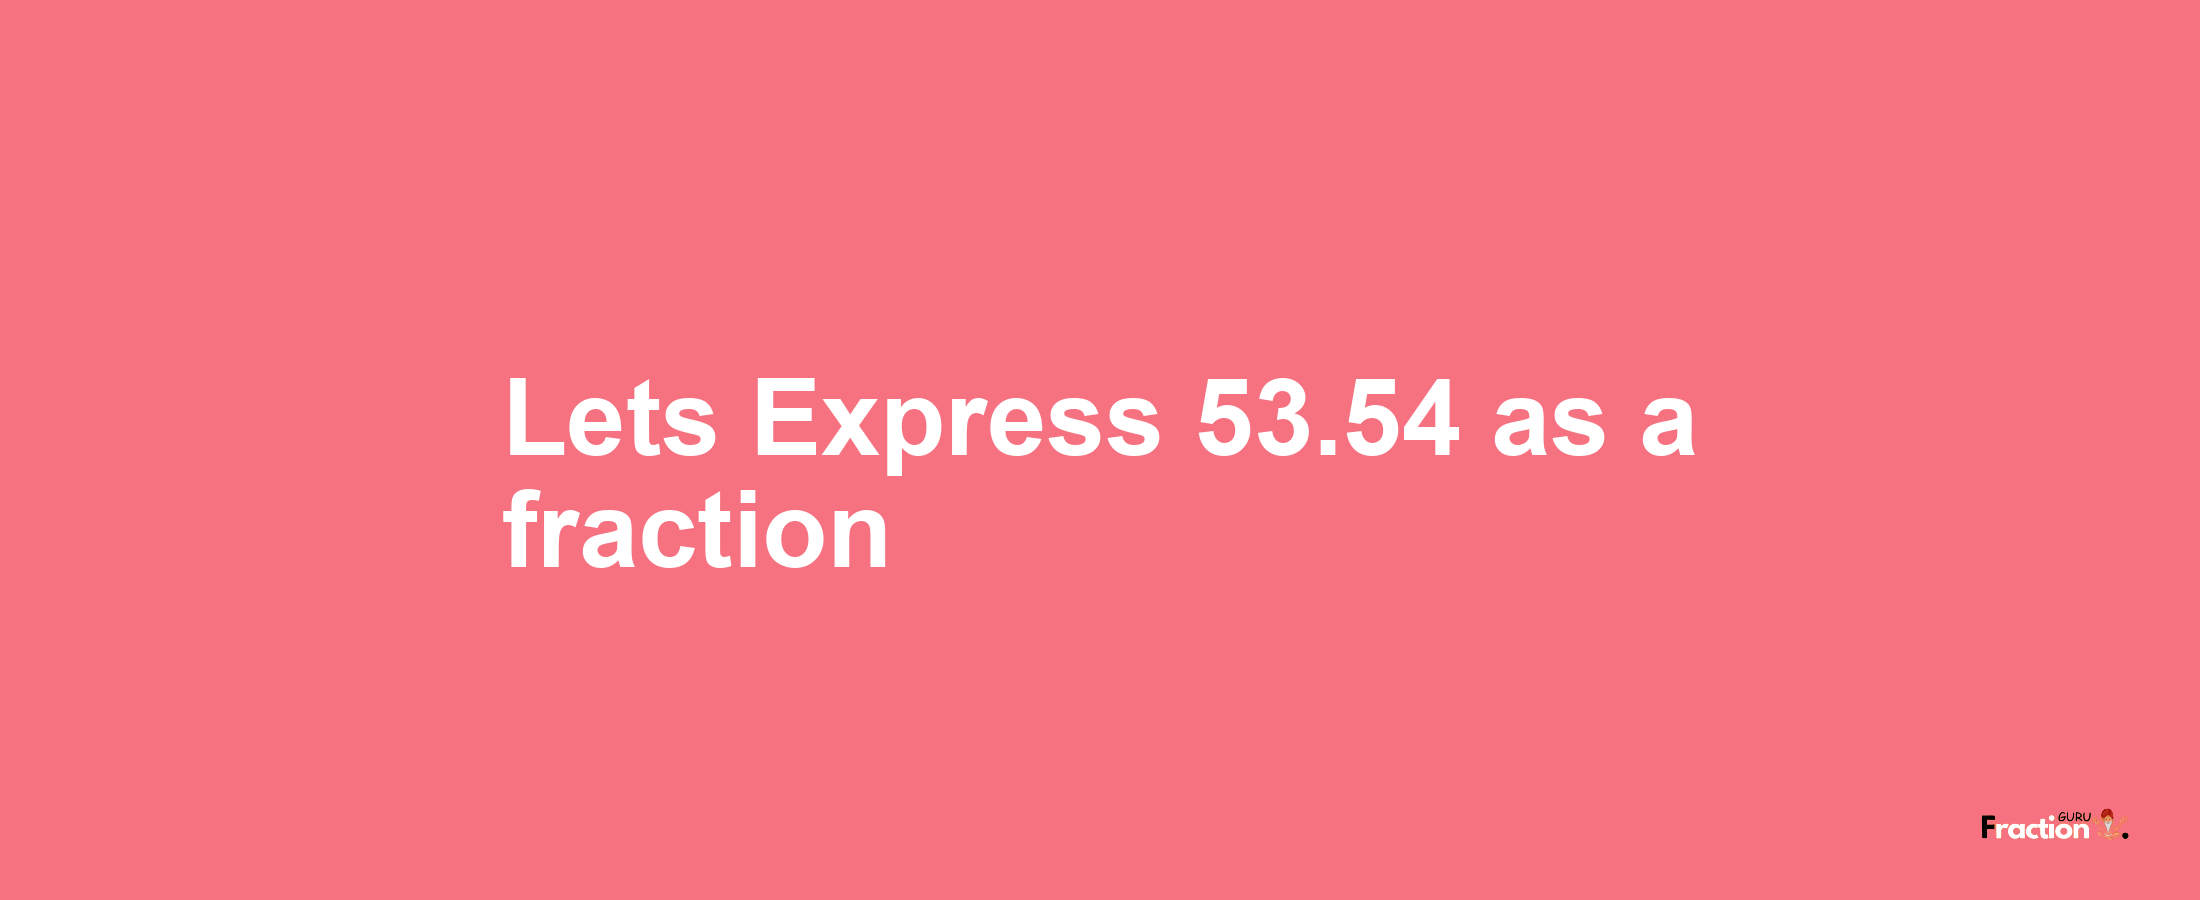 Lets Express 53.54 as afraction